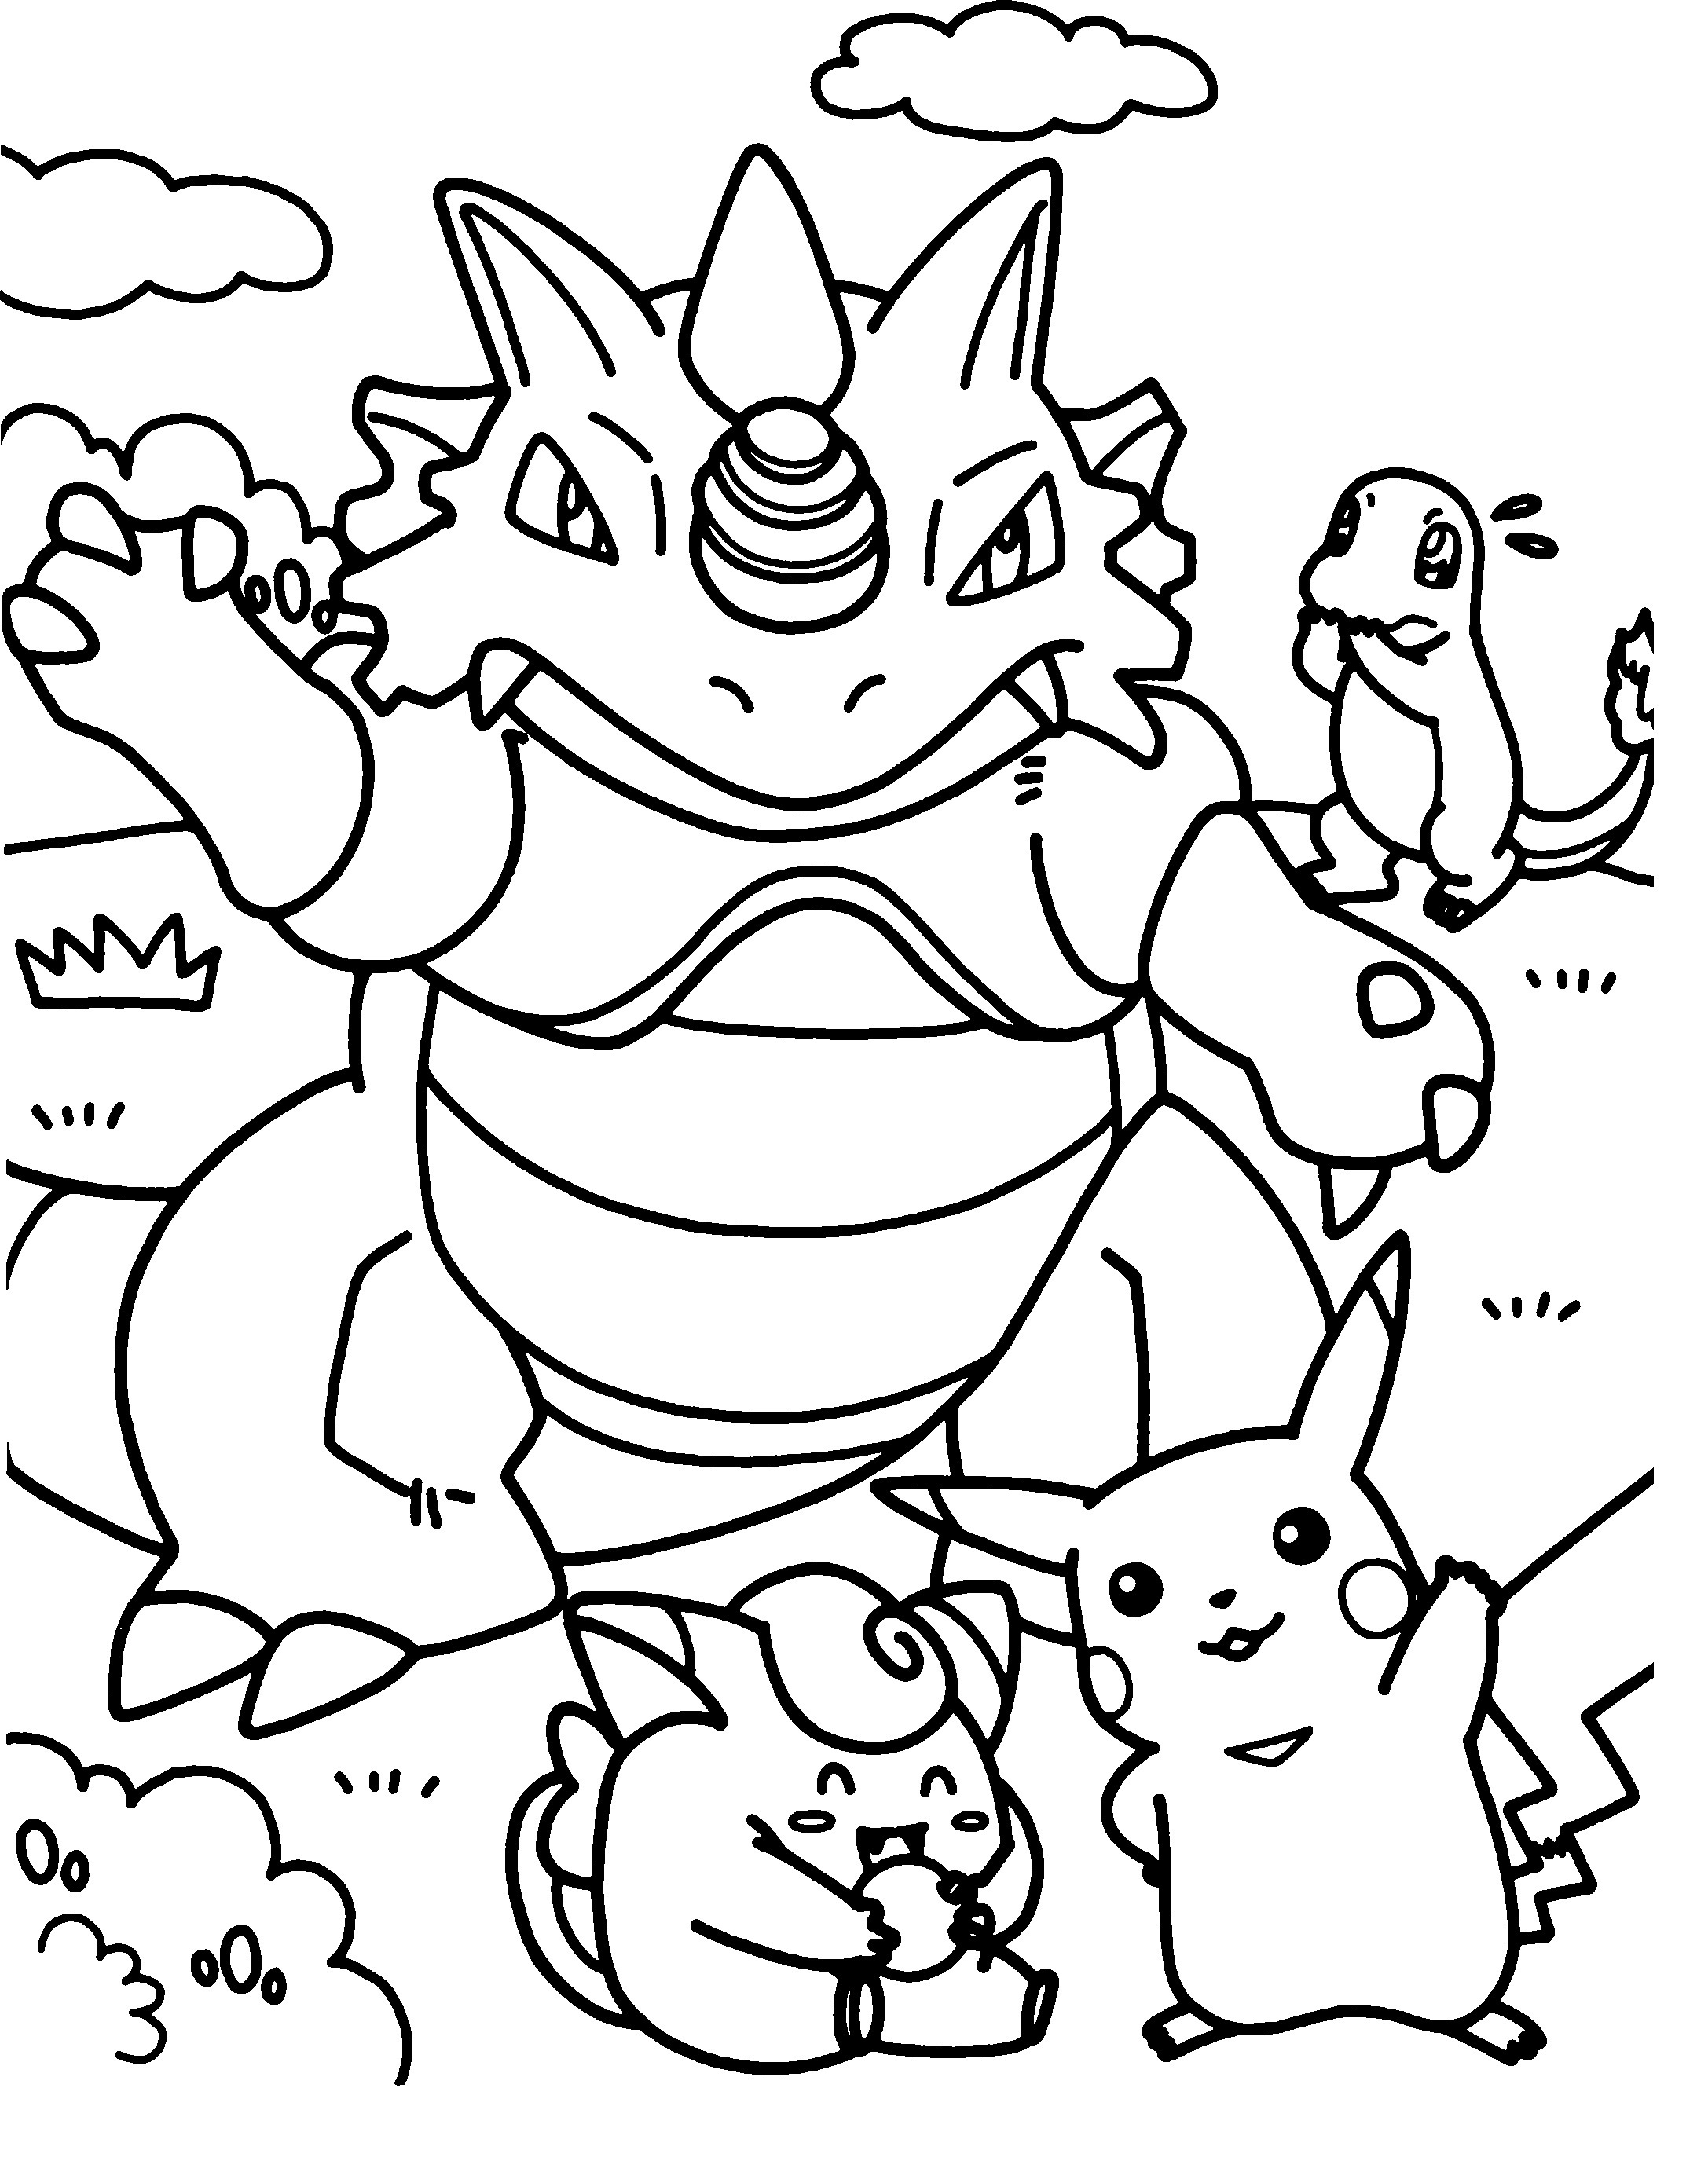 all-pokemon-coloring-pages-download-and-print-for-free-pokemon-coloring-pages-for-kids